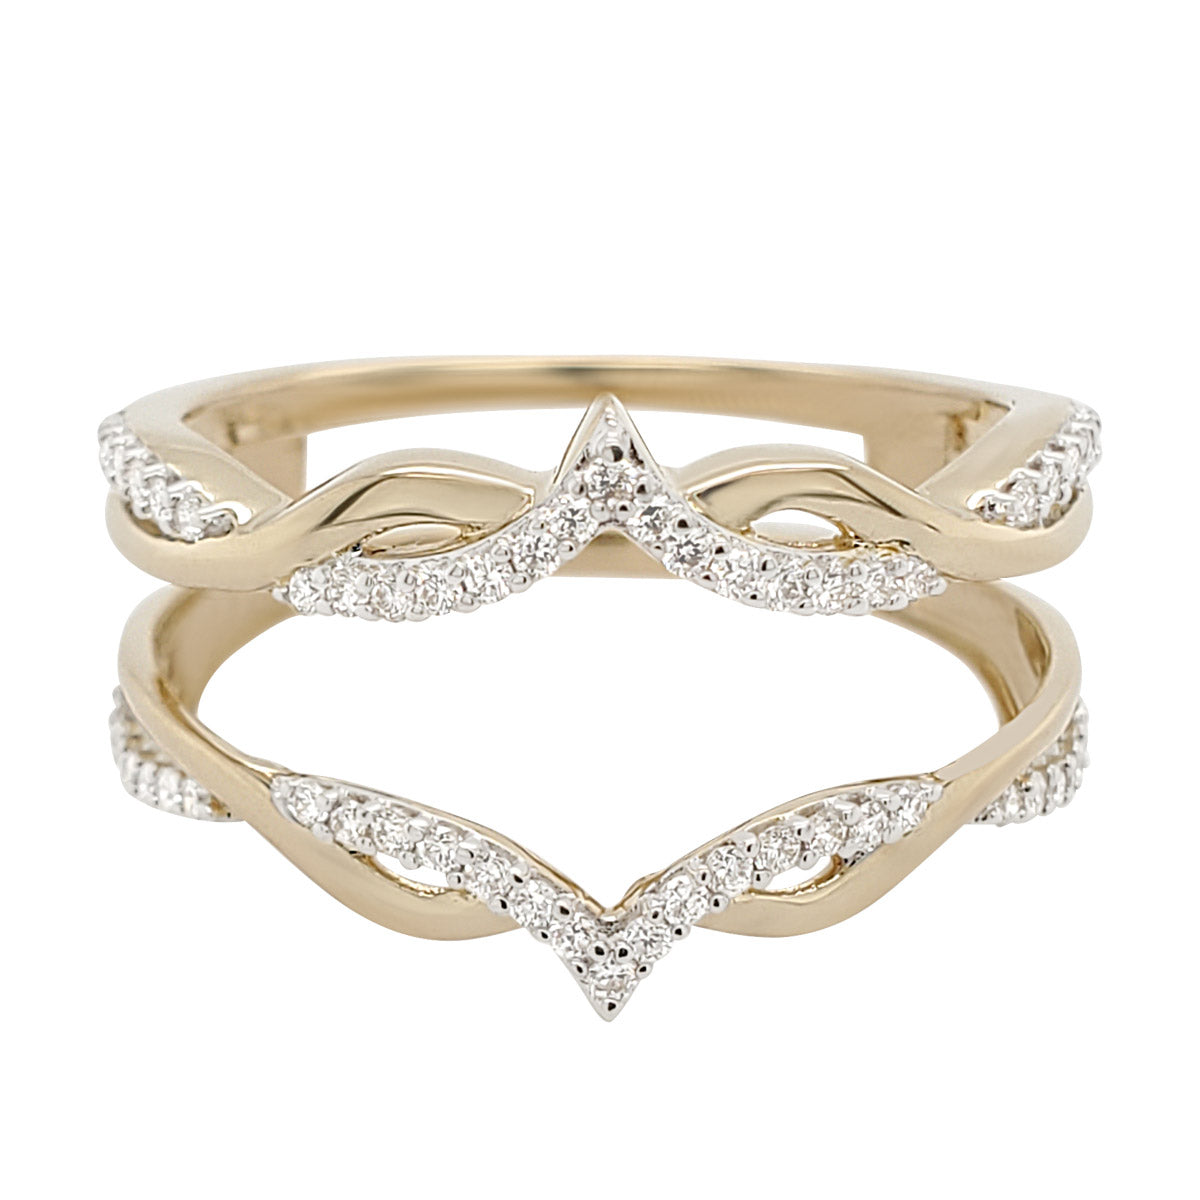 Twisted Yellow Gold Diamond Ring Guard Enhancer | Lee Michaels Fine Jewelry